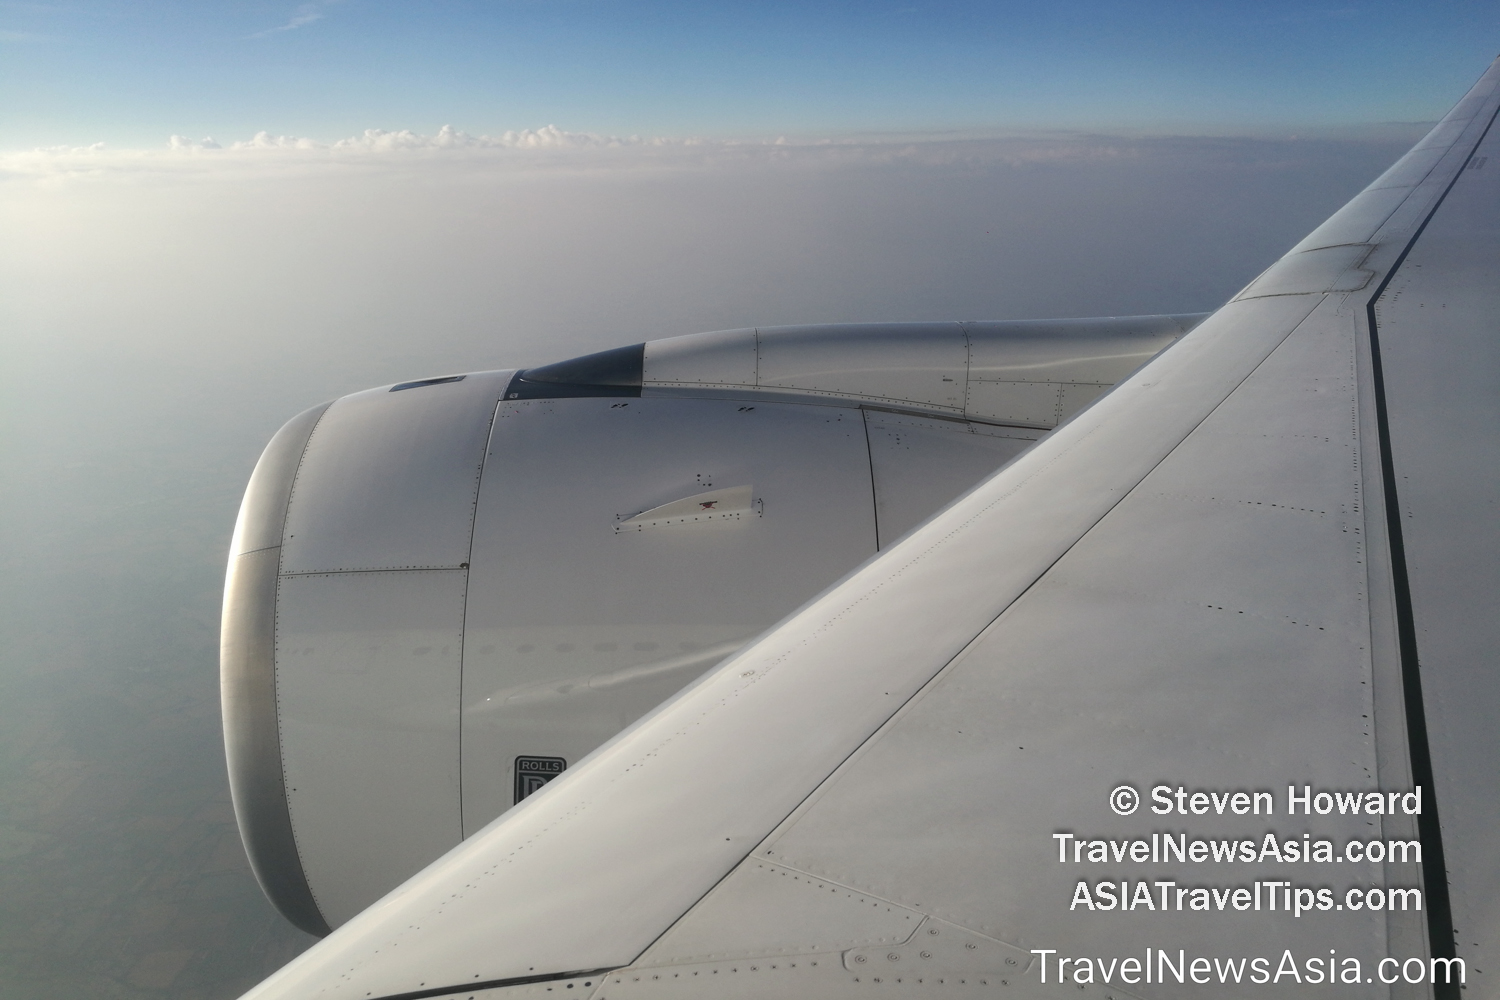 Wing of an Airbus A350-900. Picture by Steven Howard of TravelNewsAsia.com Click to enlarge.